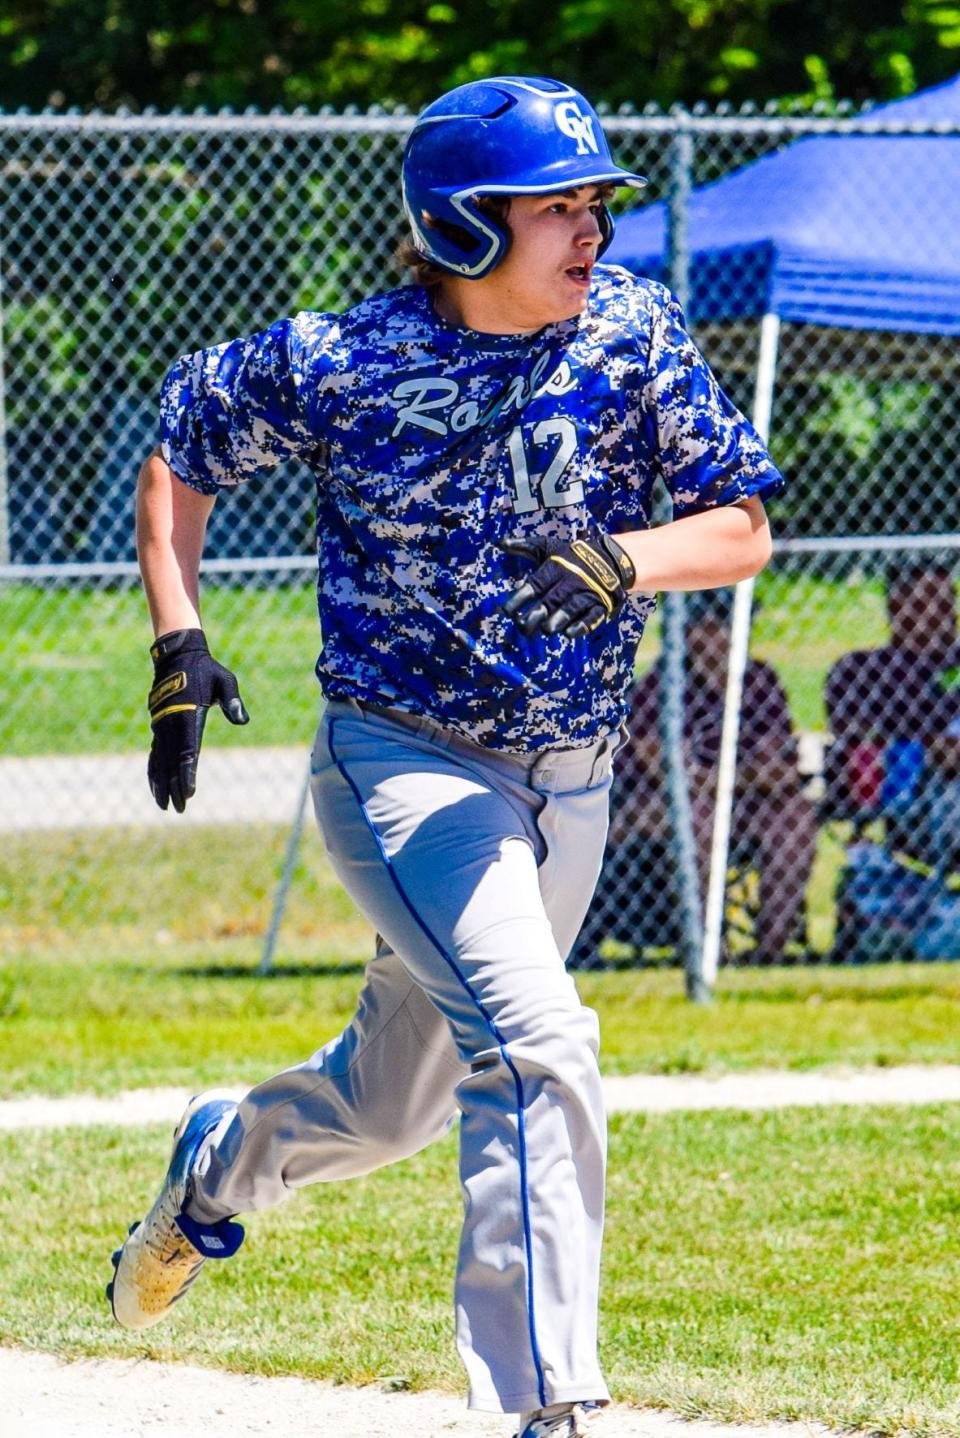 Colo-NESCO's Bradyn Carroll hustles down the line after a pinch-hit RBI single during the Royals' 19-4 win over Melcher-Dallas Saturday at Melcher.